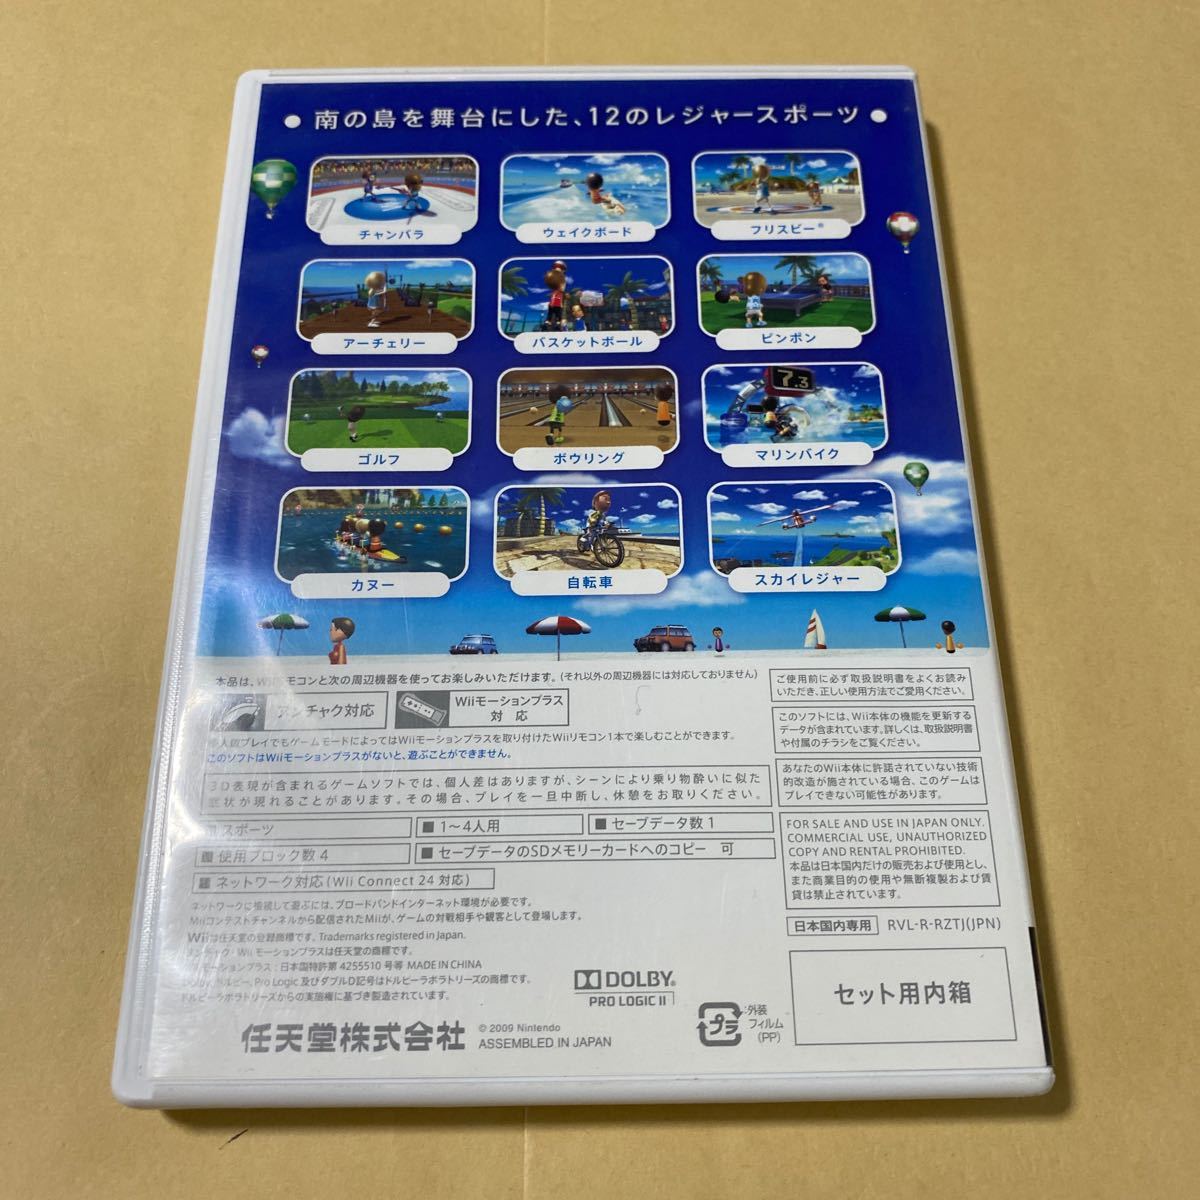 WiiスポーツリゾートとはじめてのWii